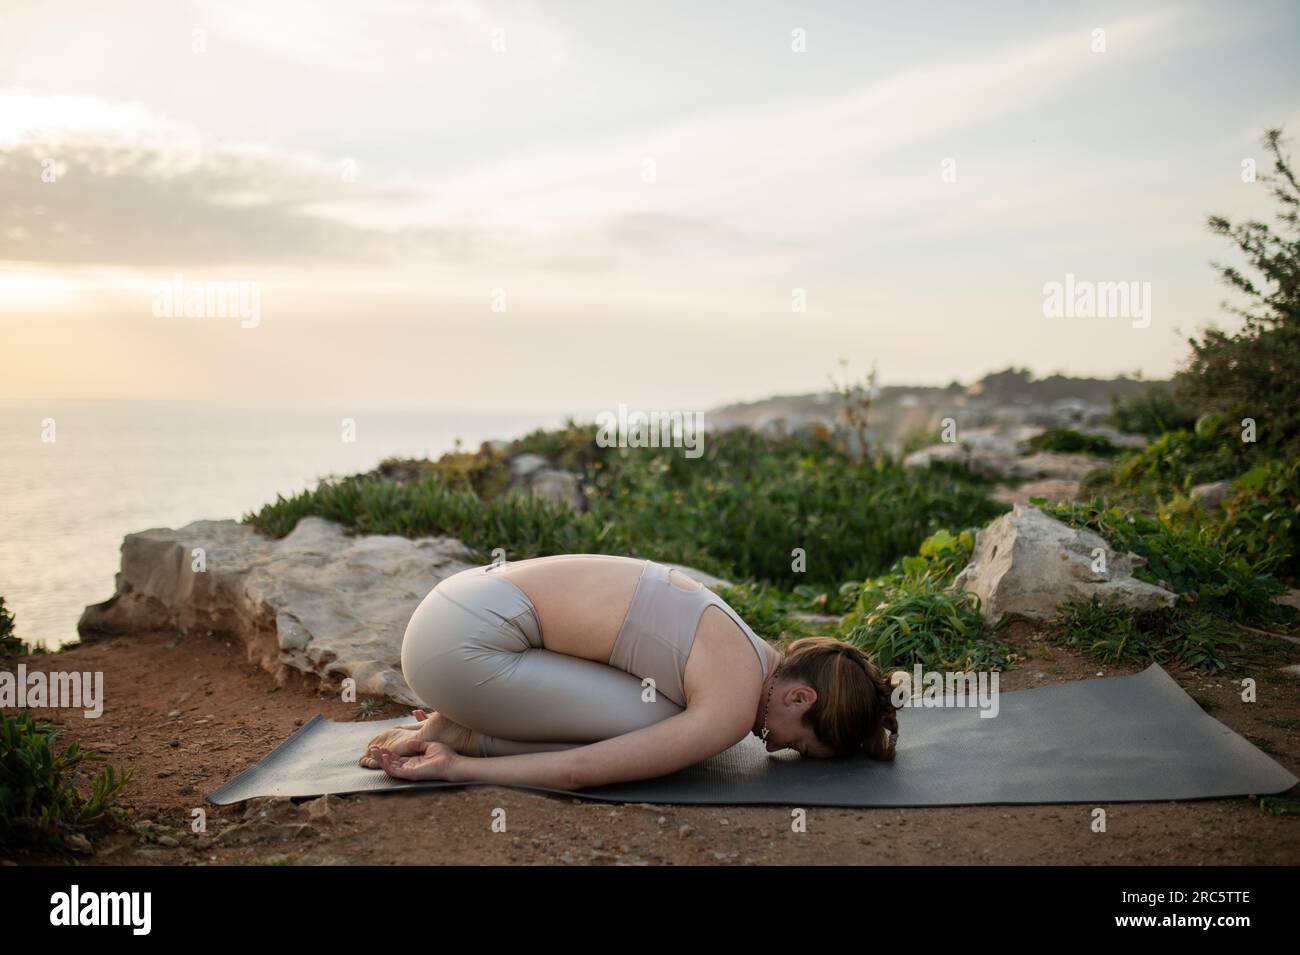 lady Stock workout outdoor Photo practices Young - Alamy sportswear morning yoga, european enjoys in